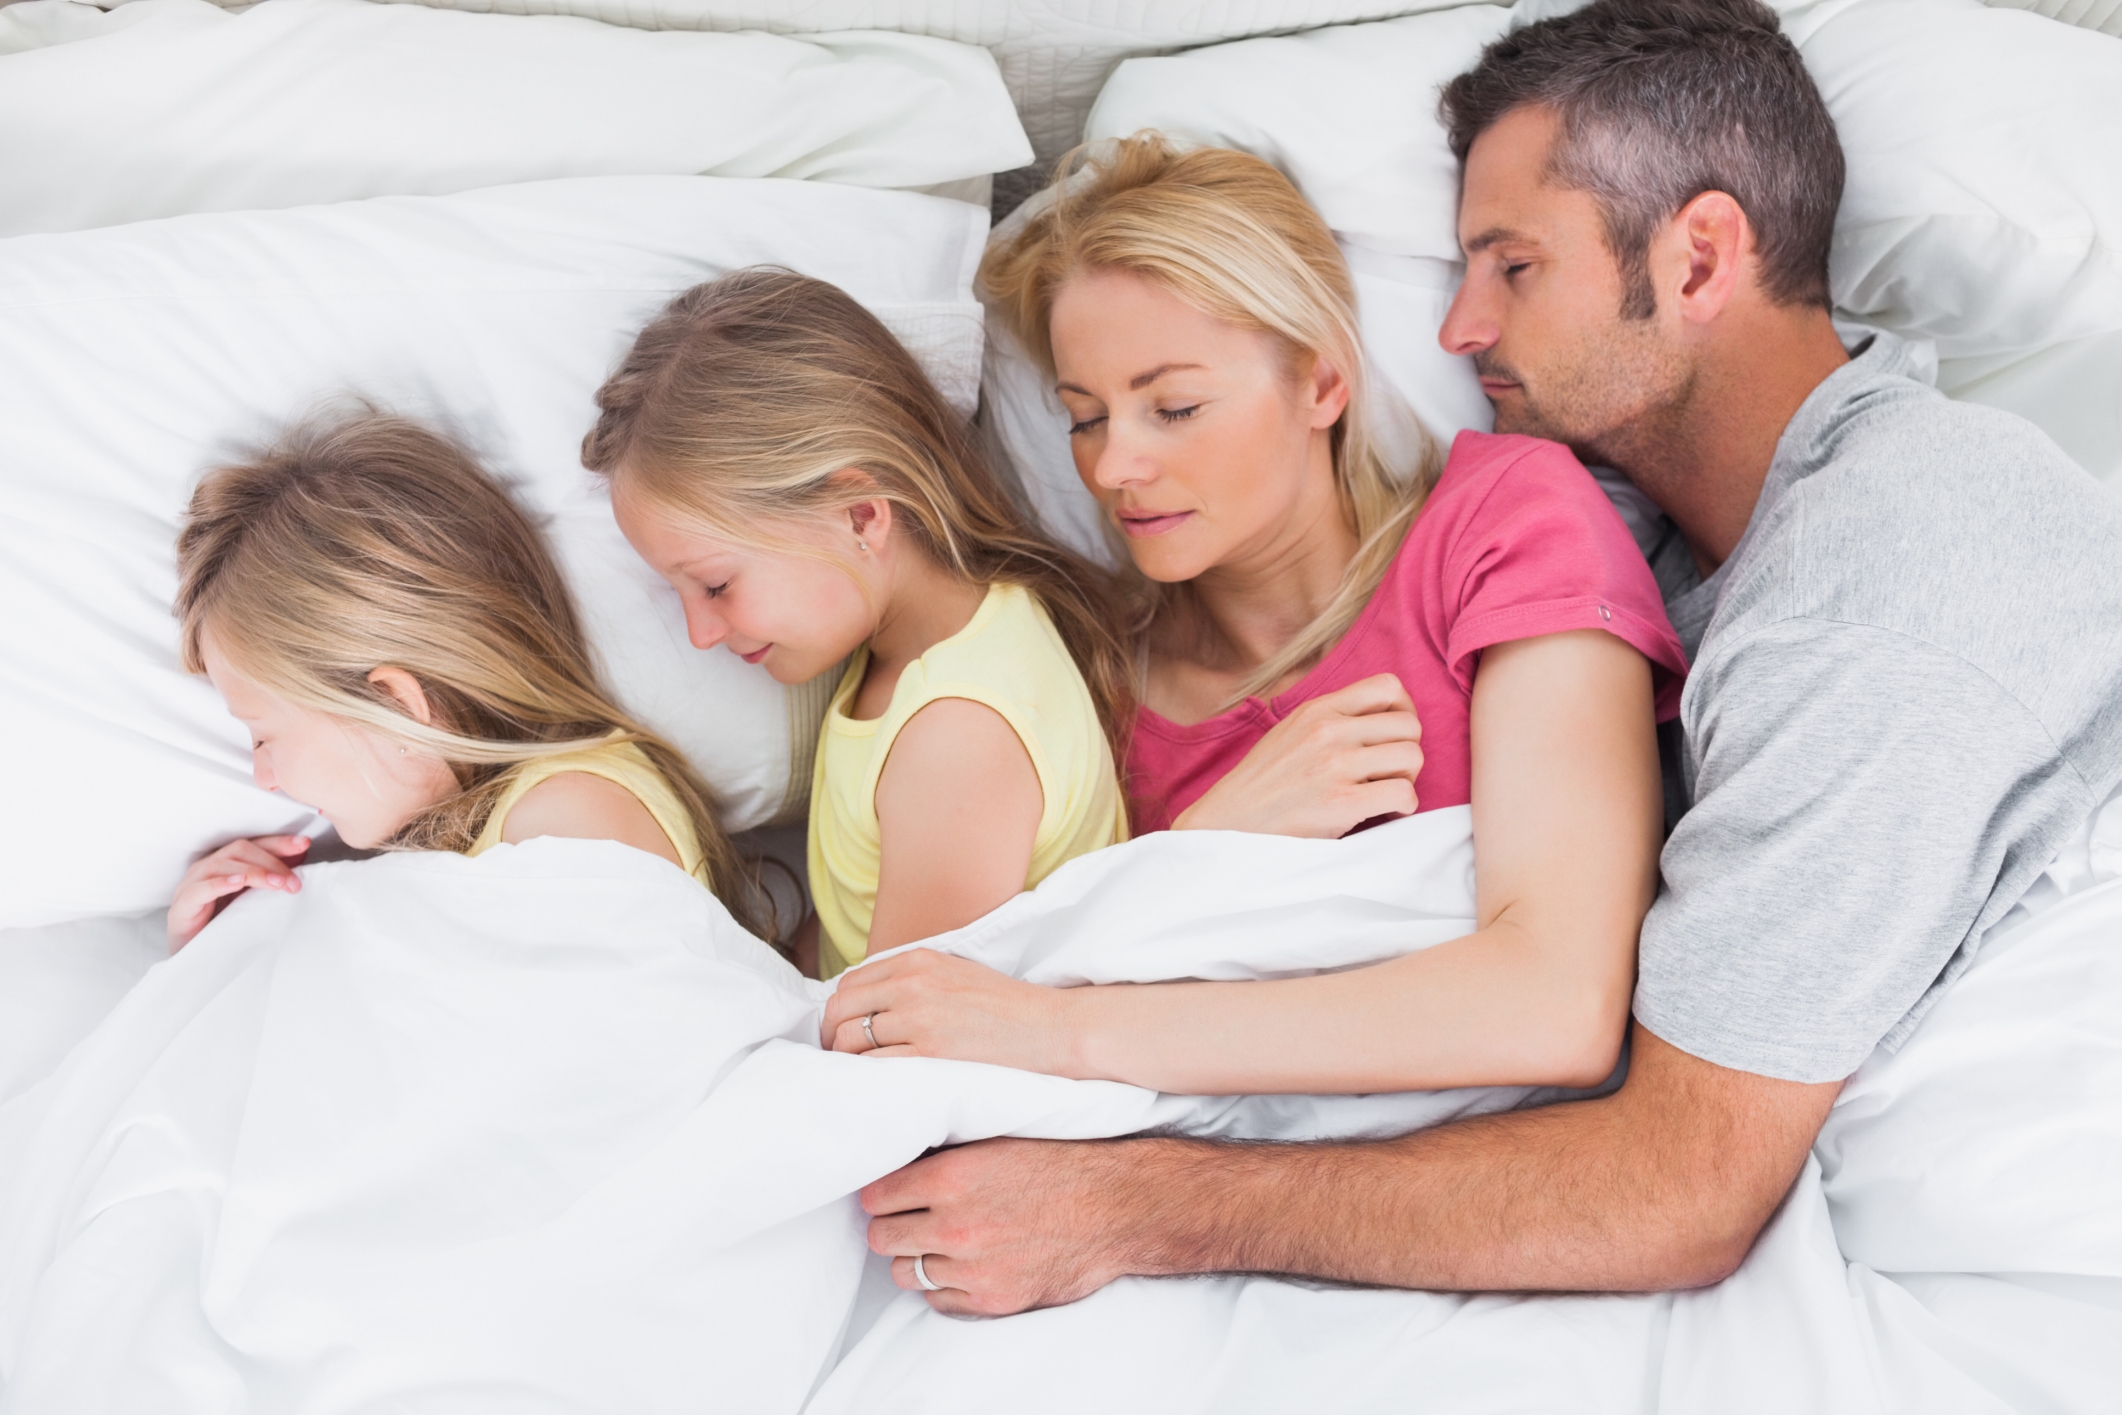 Is sleeping a group activity? How to get kids back in their own beds